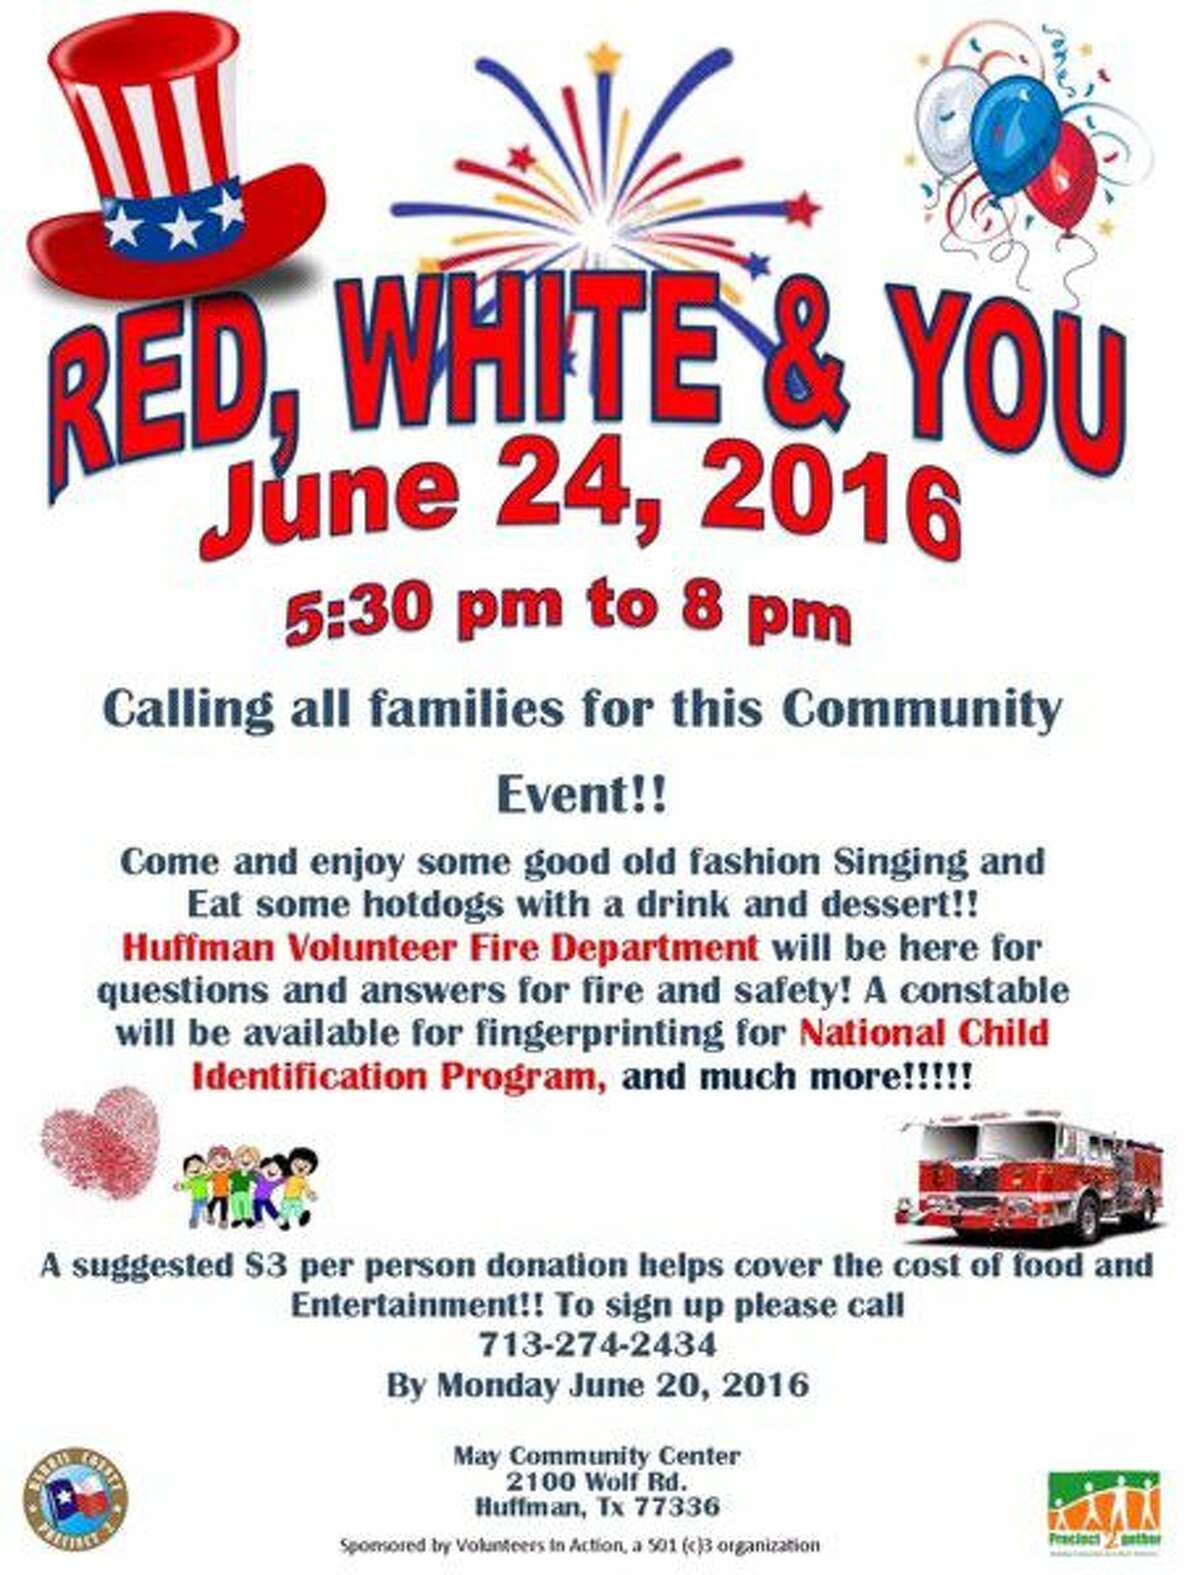 Red, White and You event to offer tunes, food, family fun